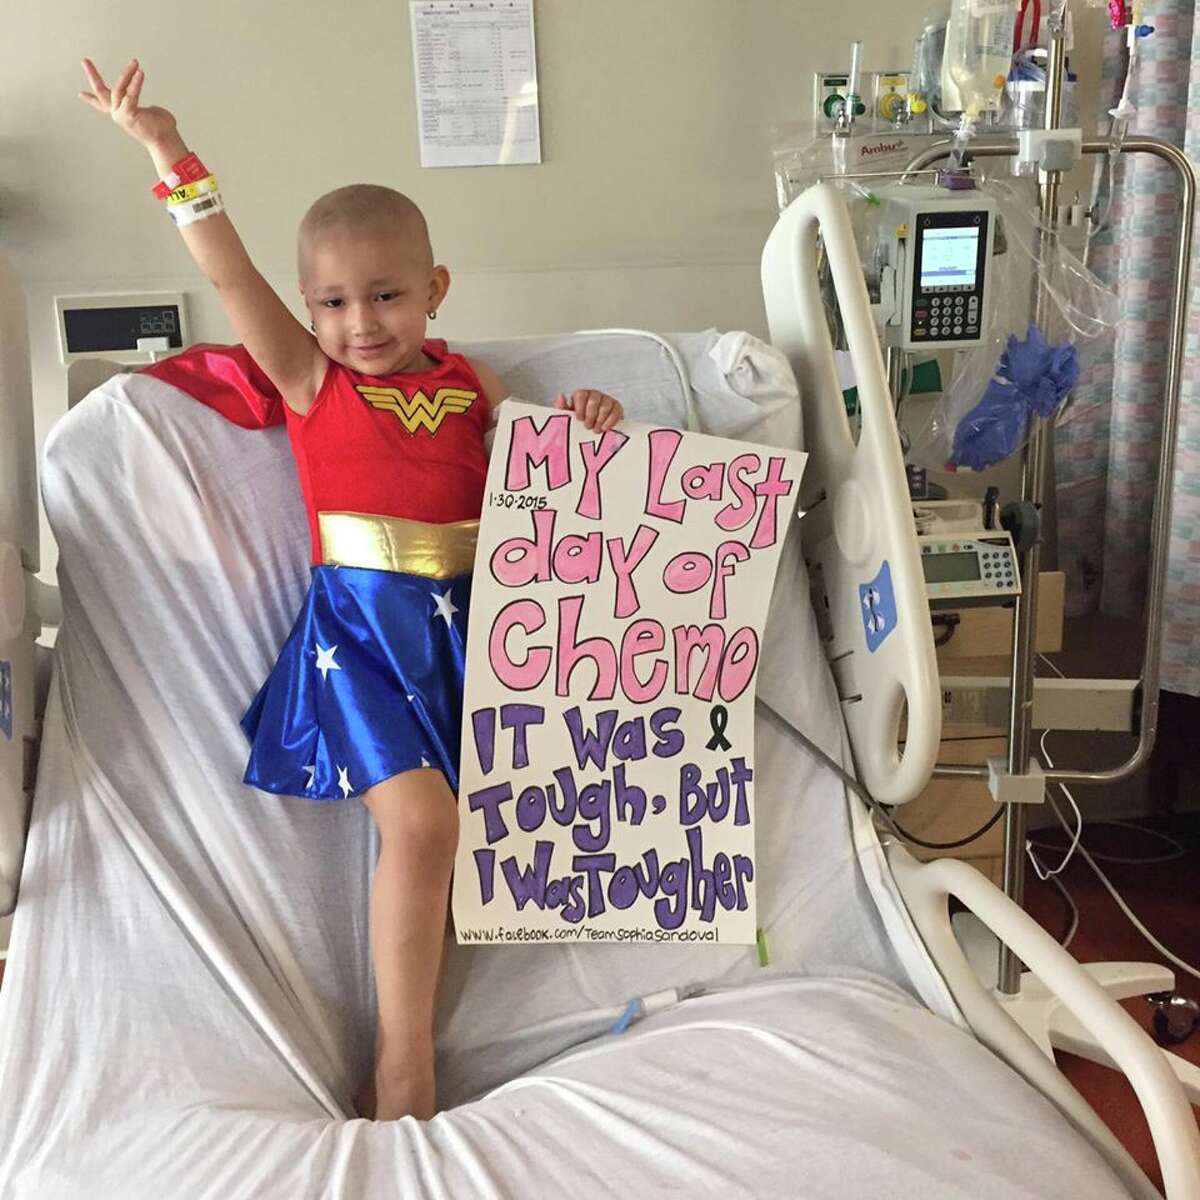 Sophia Sandoval, 3, announced her last day of chemotherapy while wearing a Wonder Woman costume.